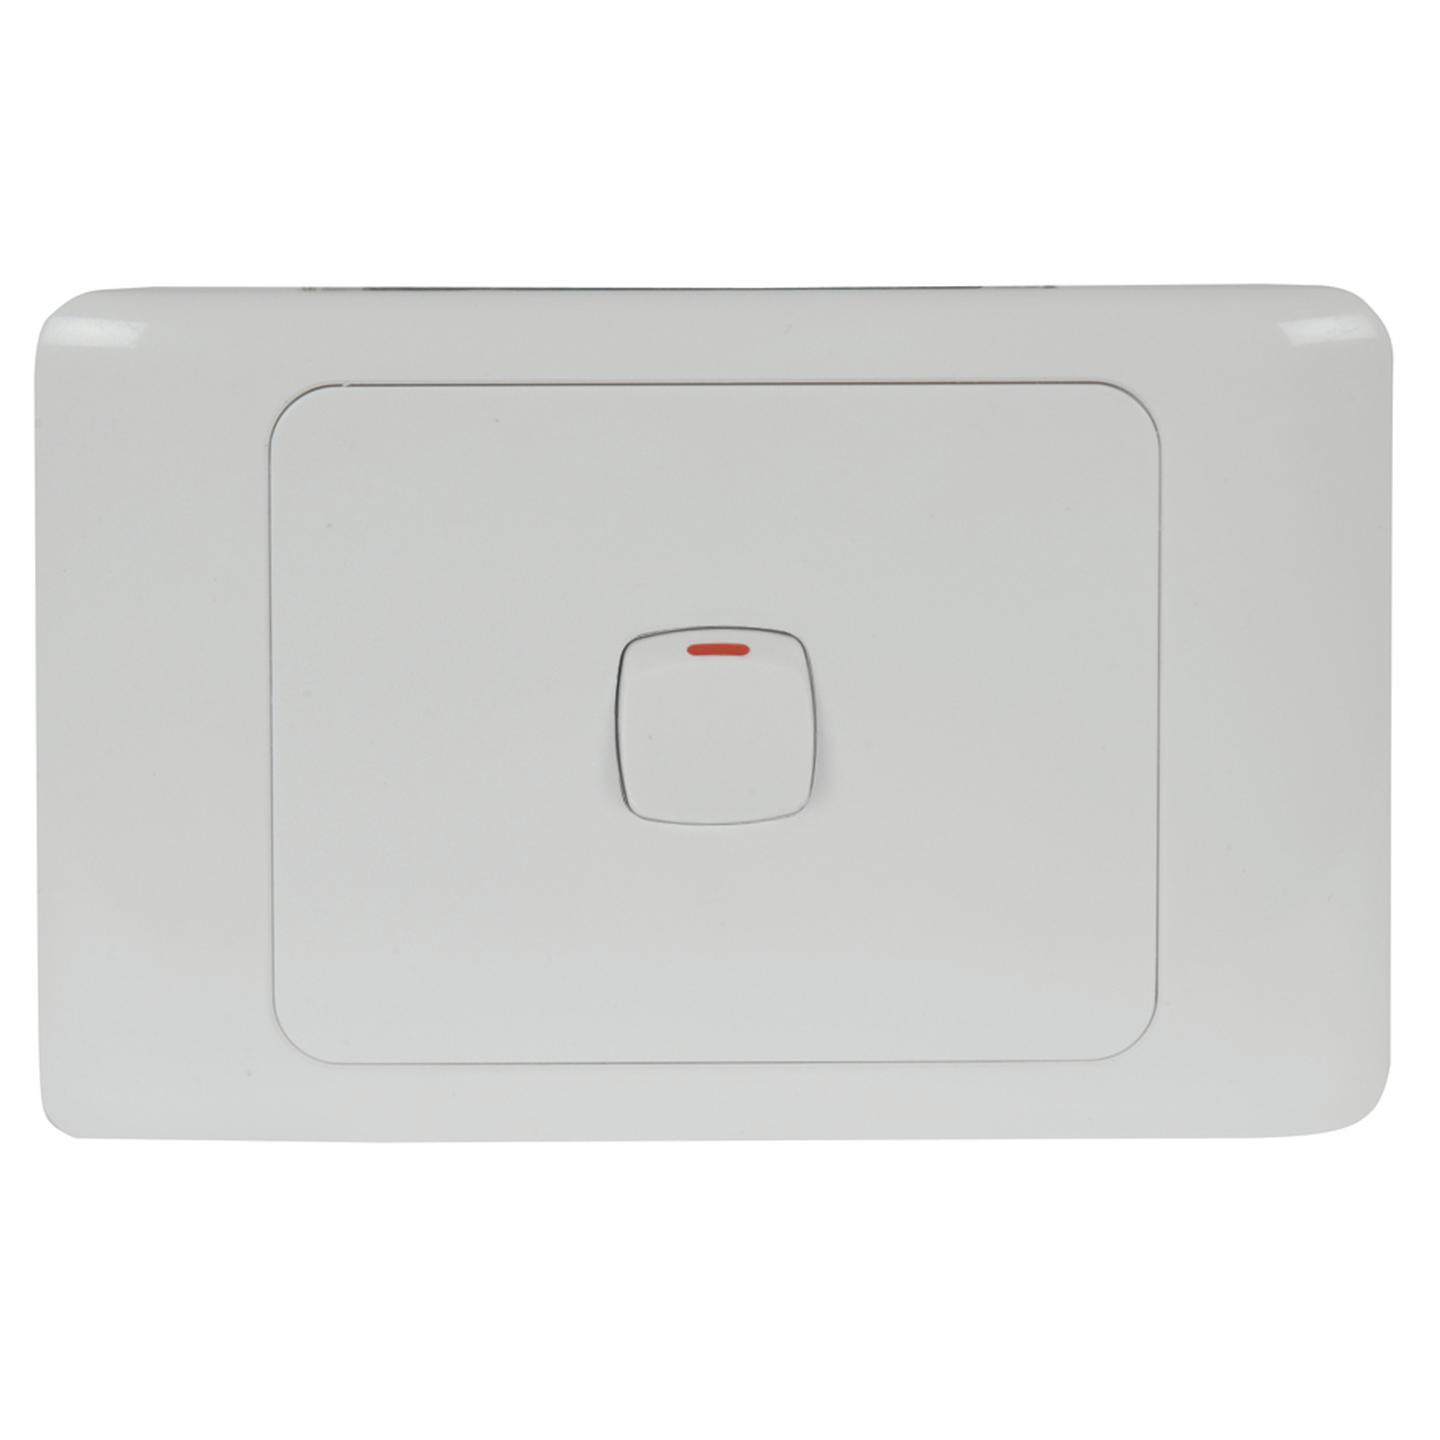 Mains Wall-Mount Light Switches